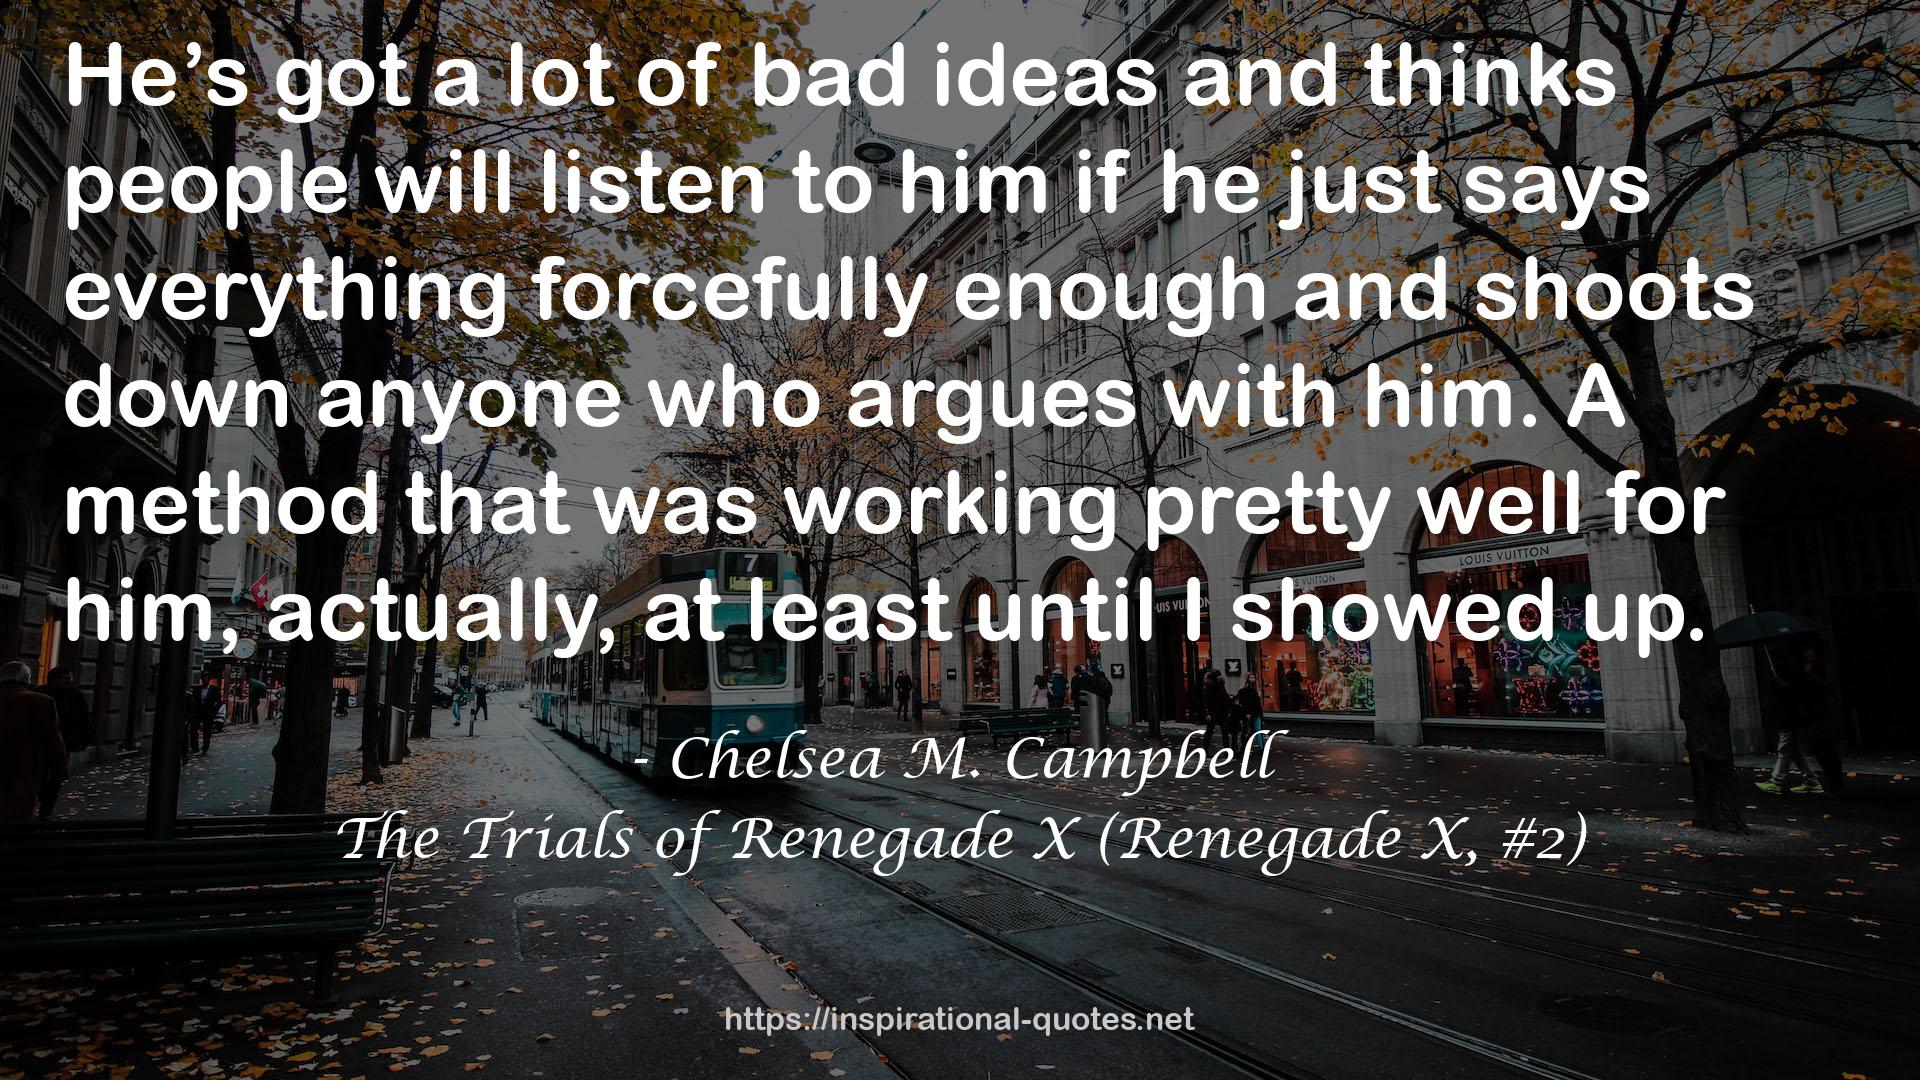 The Trials of Renegade X (Renegade X, #2) QUOTES